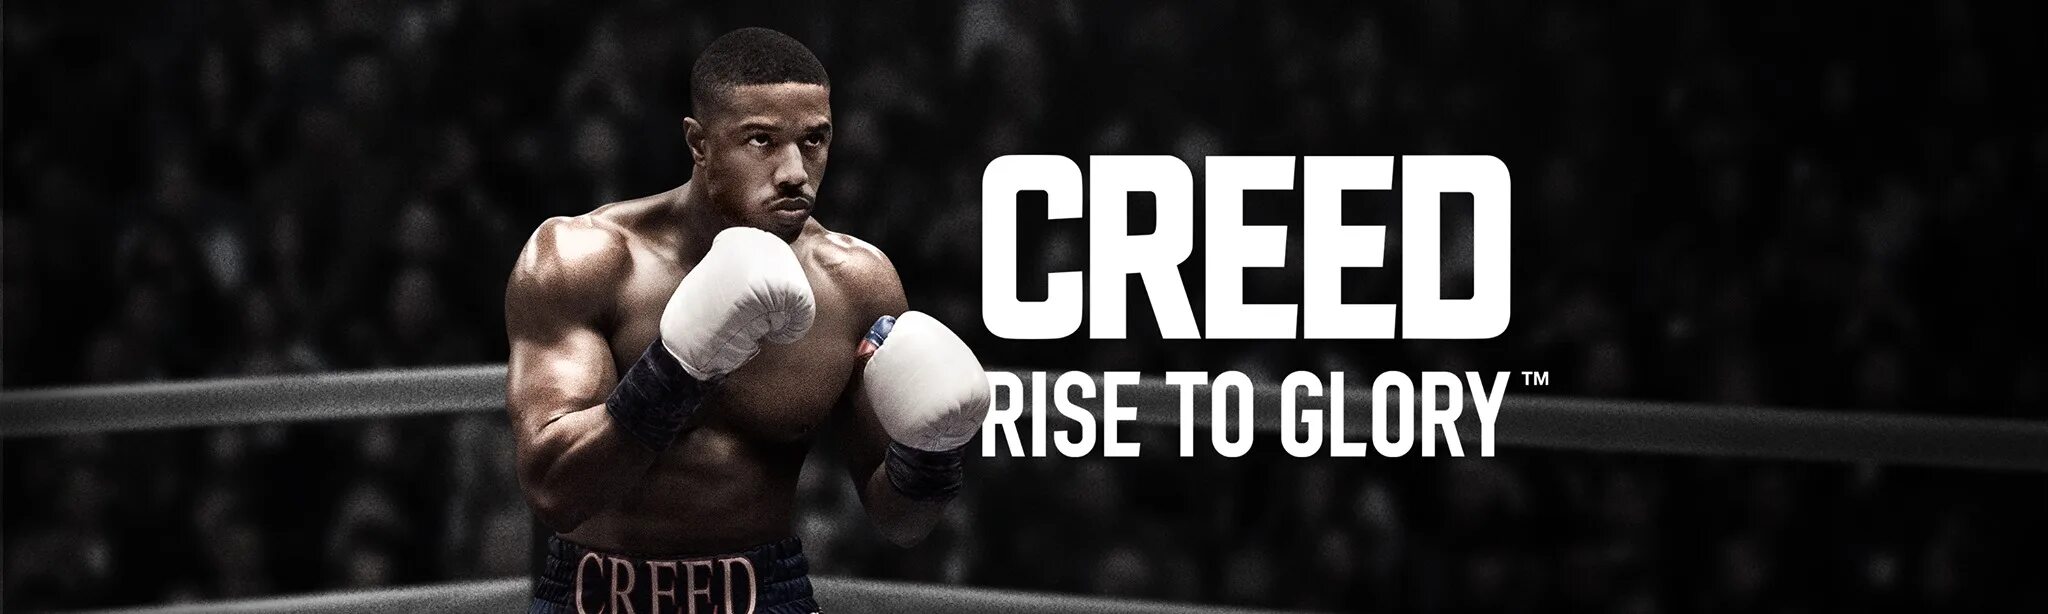 Creed Rise to Glory. Creed VR игра. Creed Rise to Glory обложка. Крид адванс. Rise to glory vr